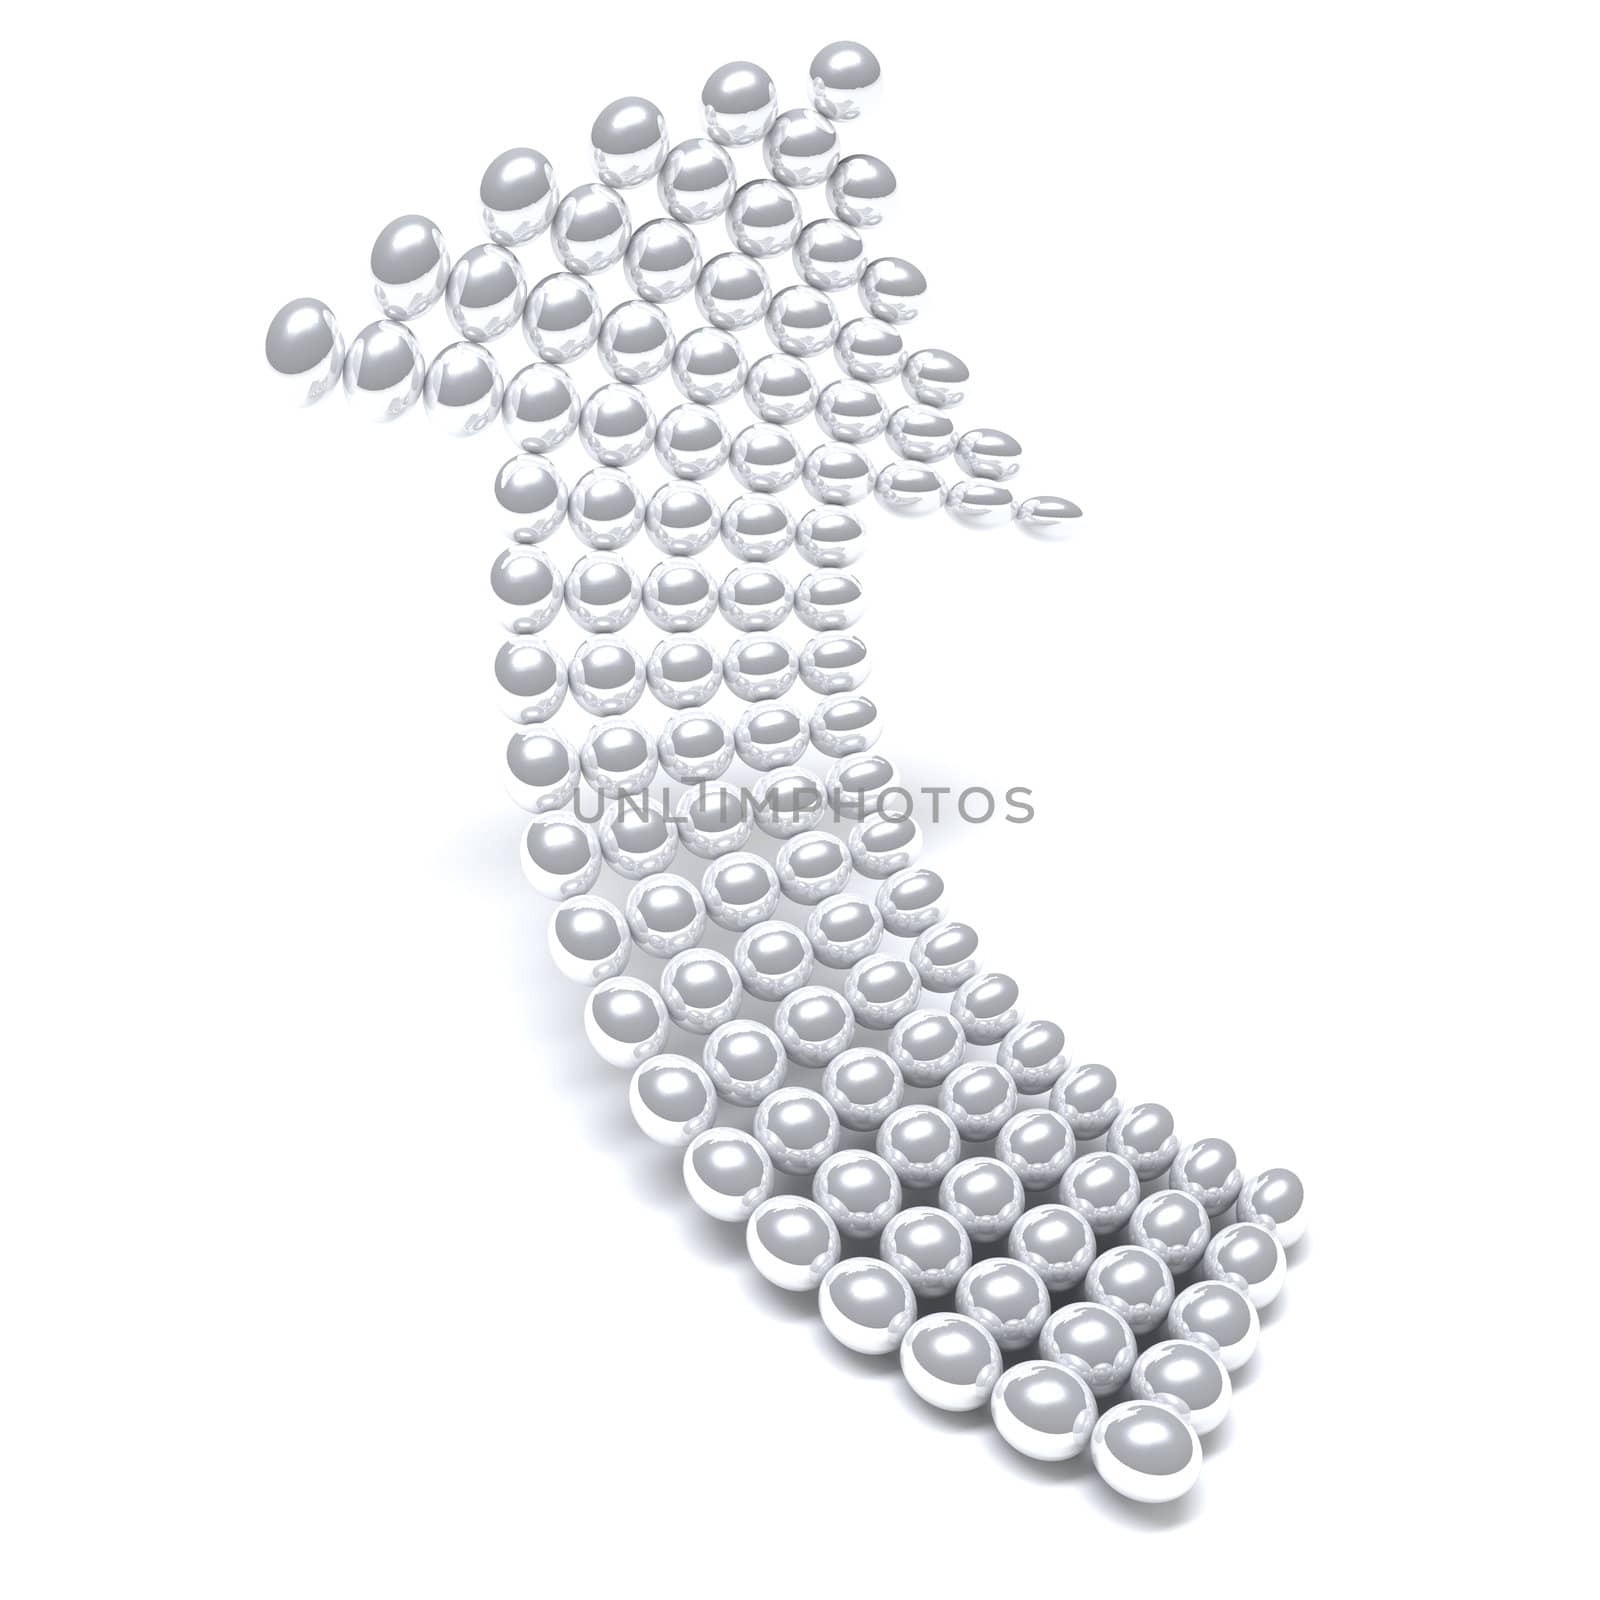 Grey arrow consisting of metal balls on a white background